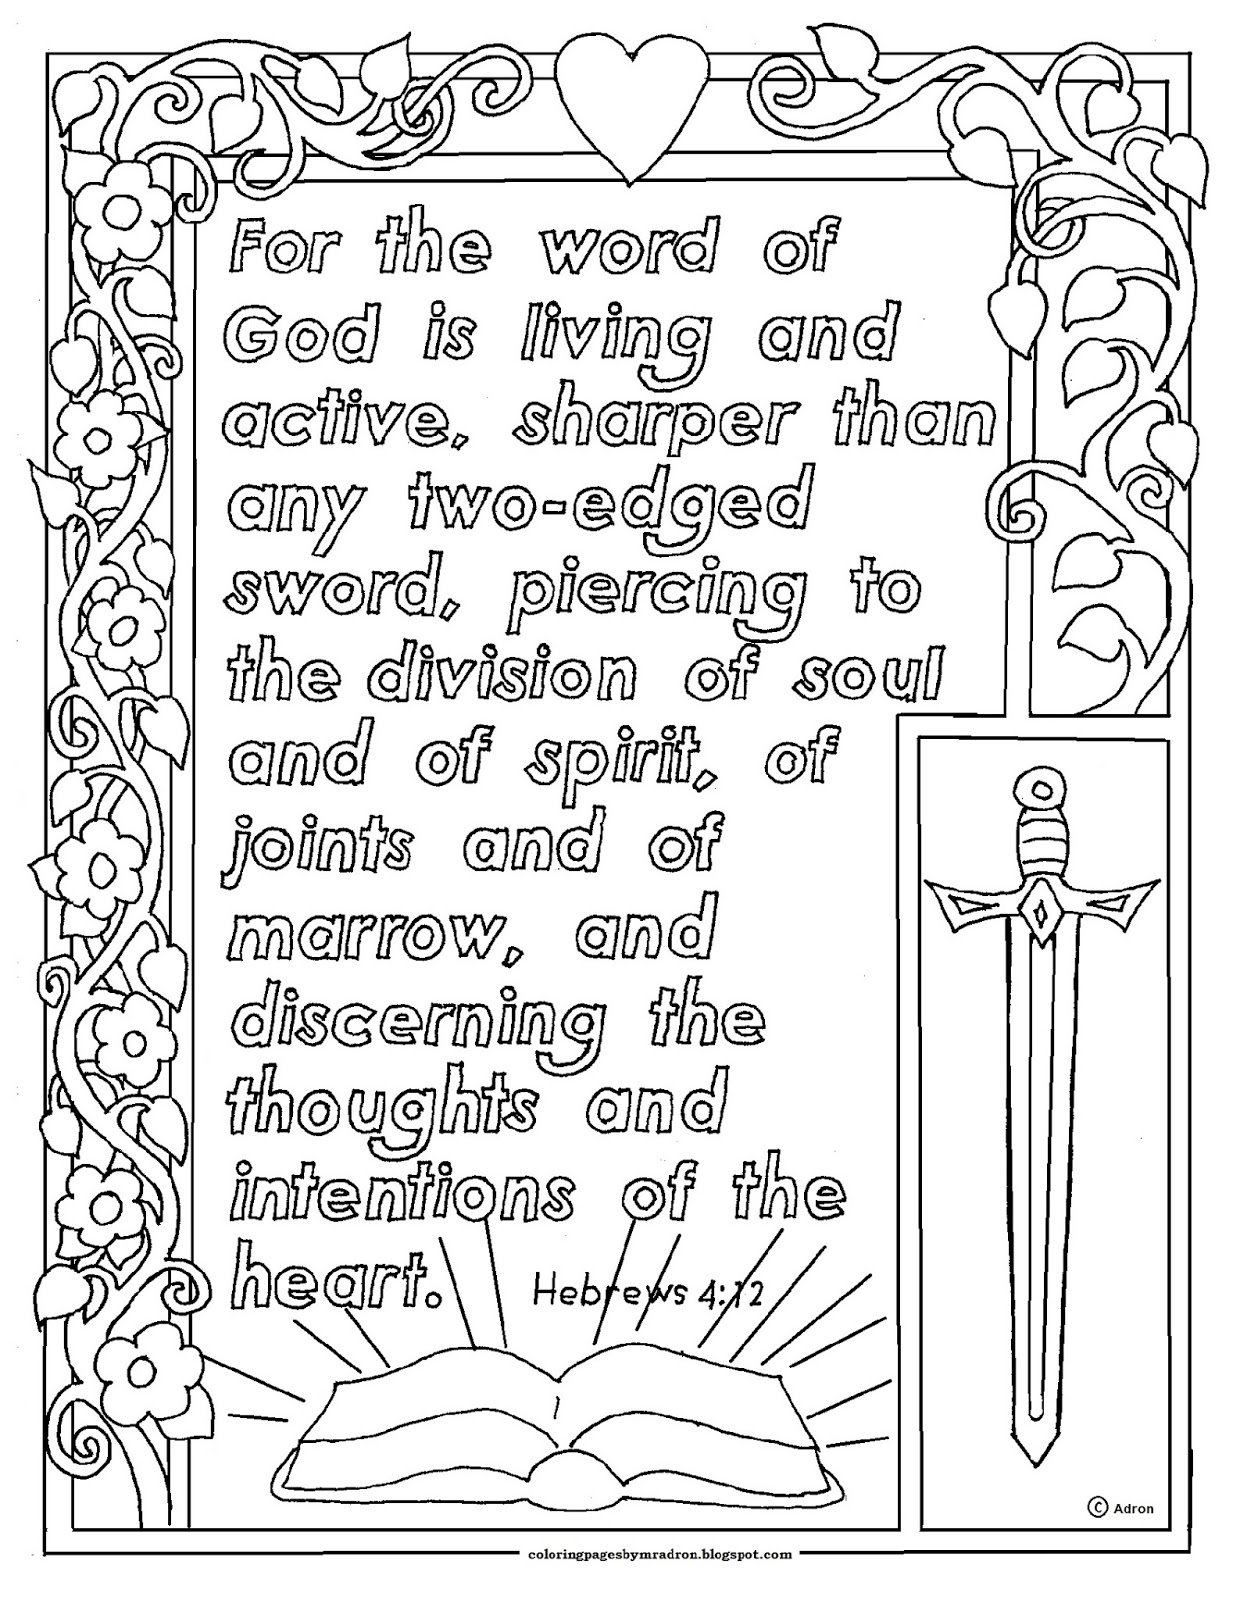 hebrews-13-8-coloring-page-coloring-pages-porn-sex-picture